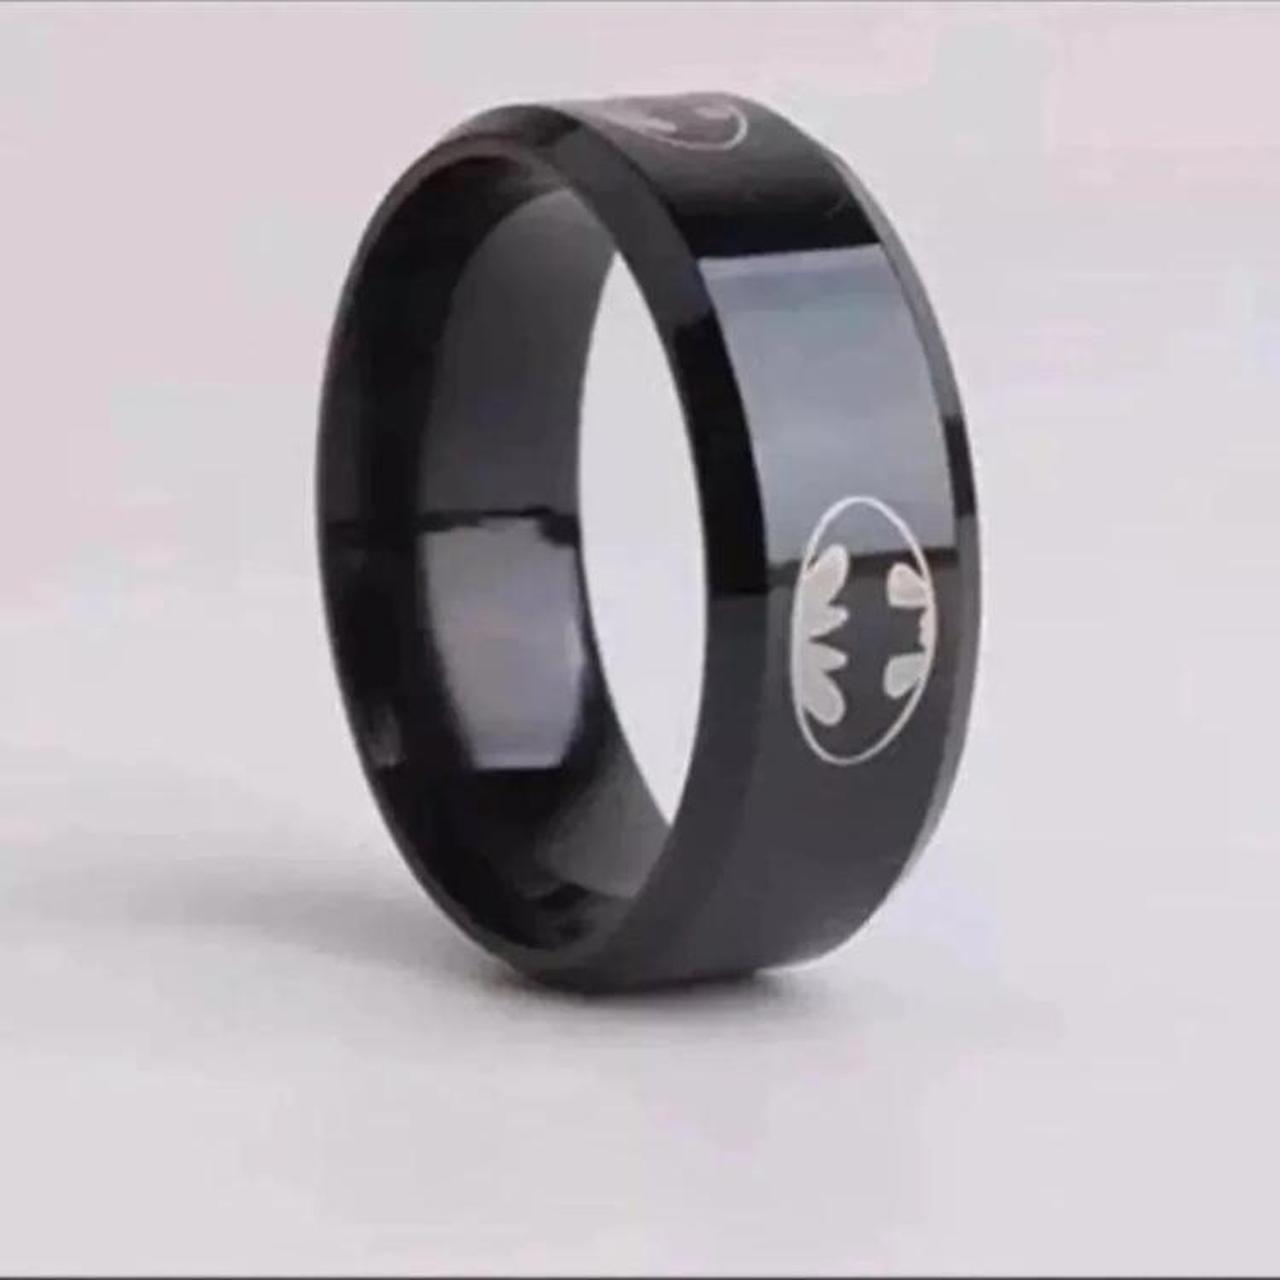 Product Image 2 - 6mm black batman ring
Condition: 100%